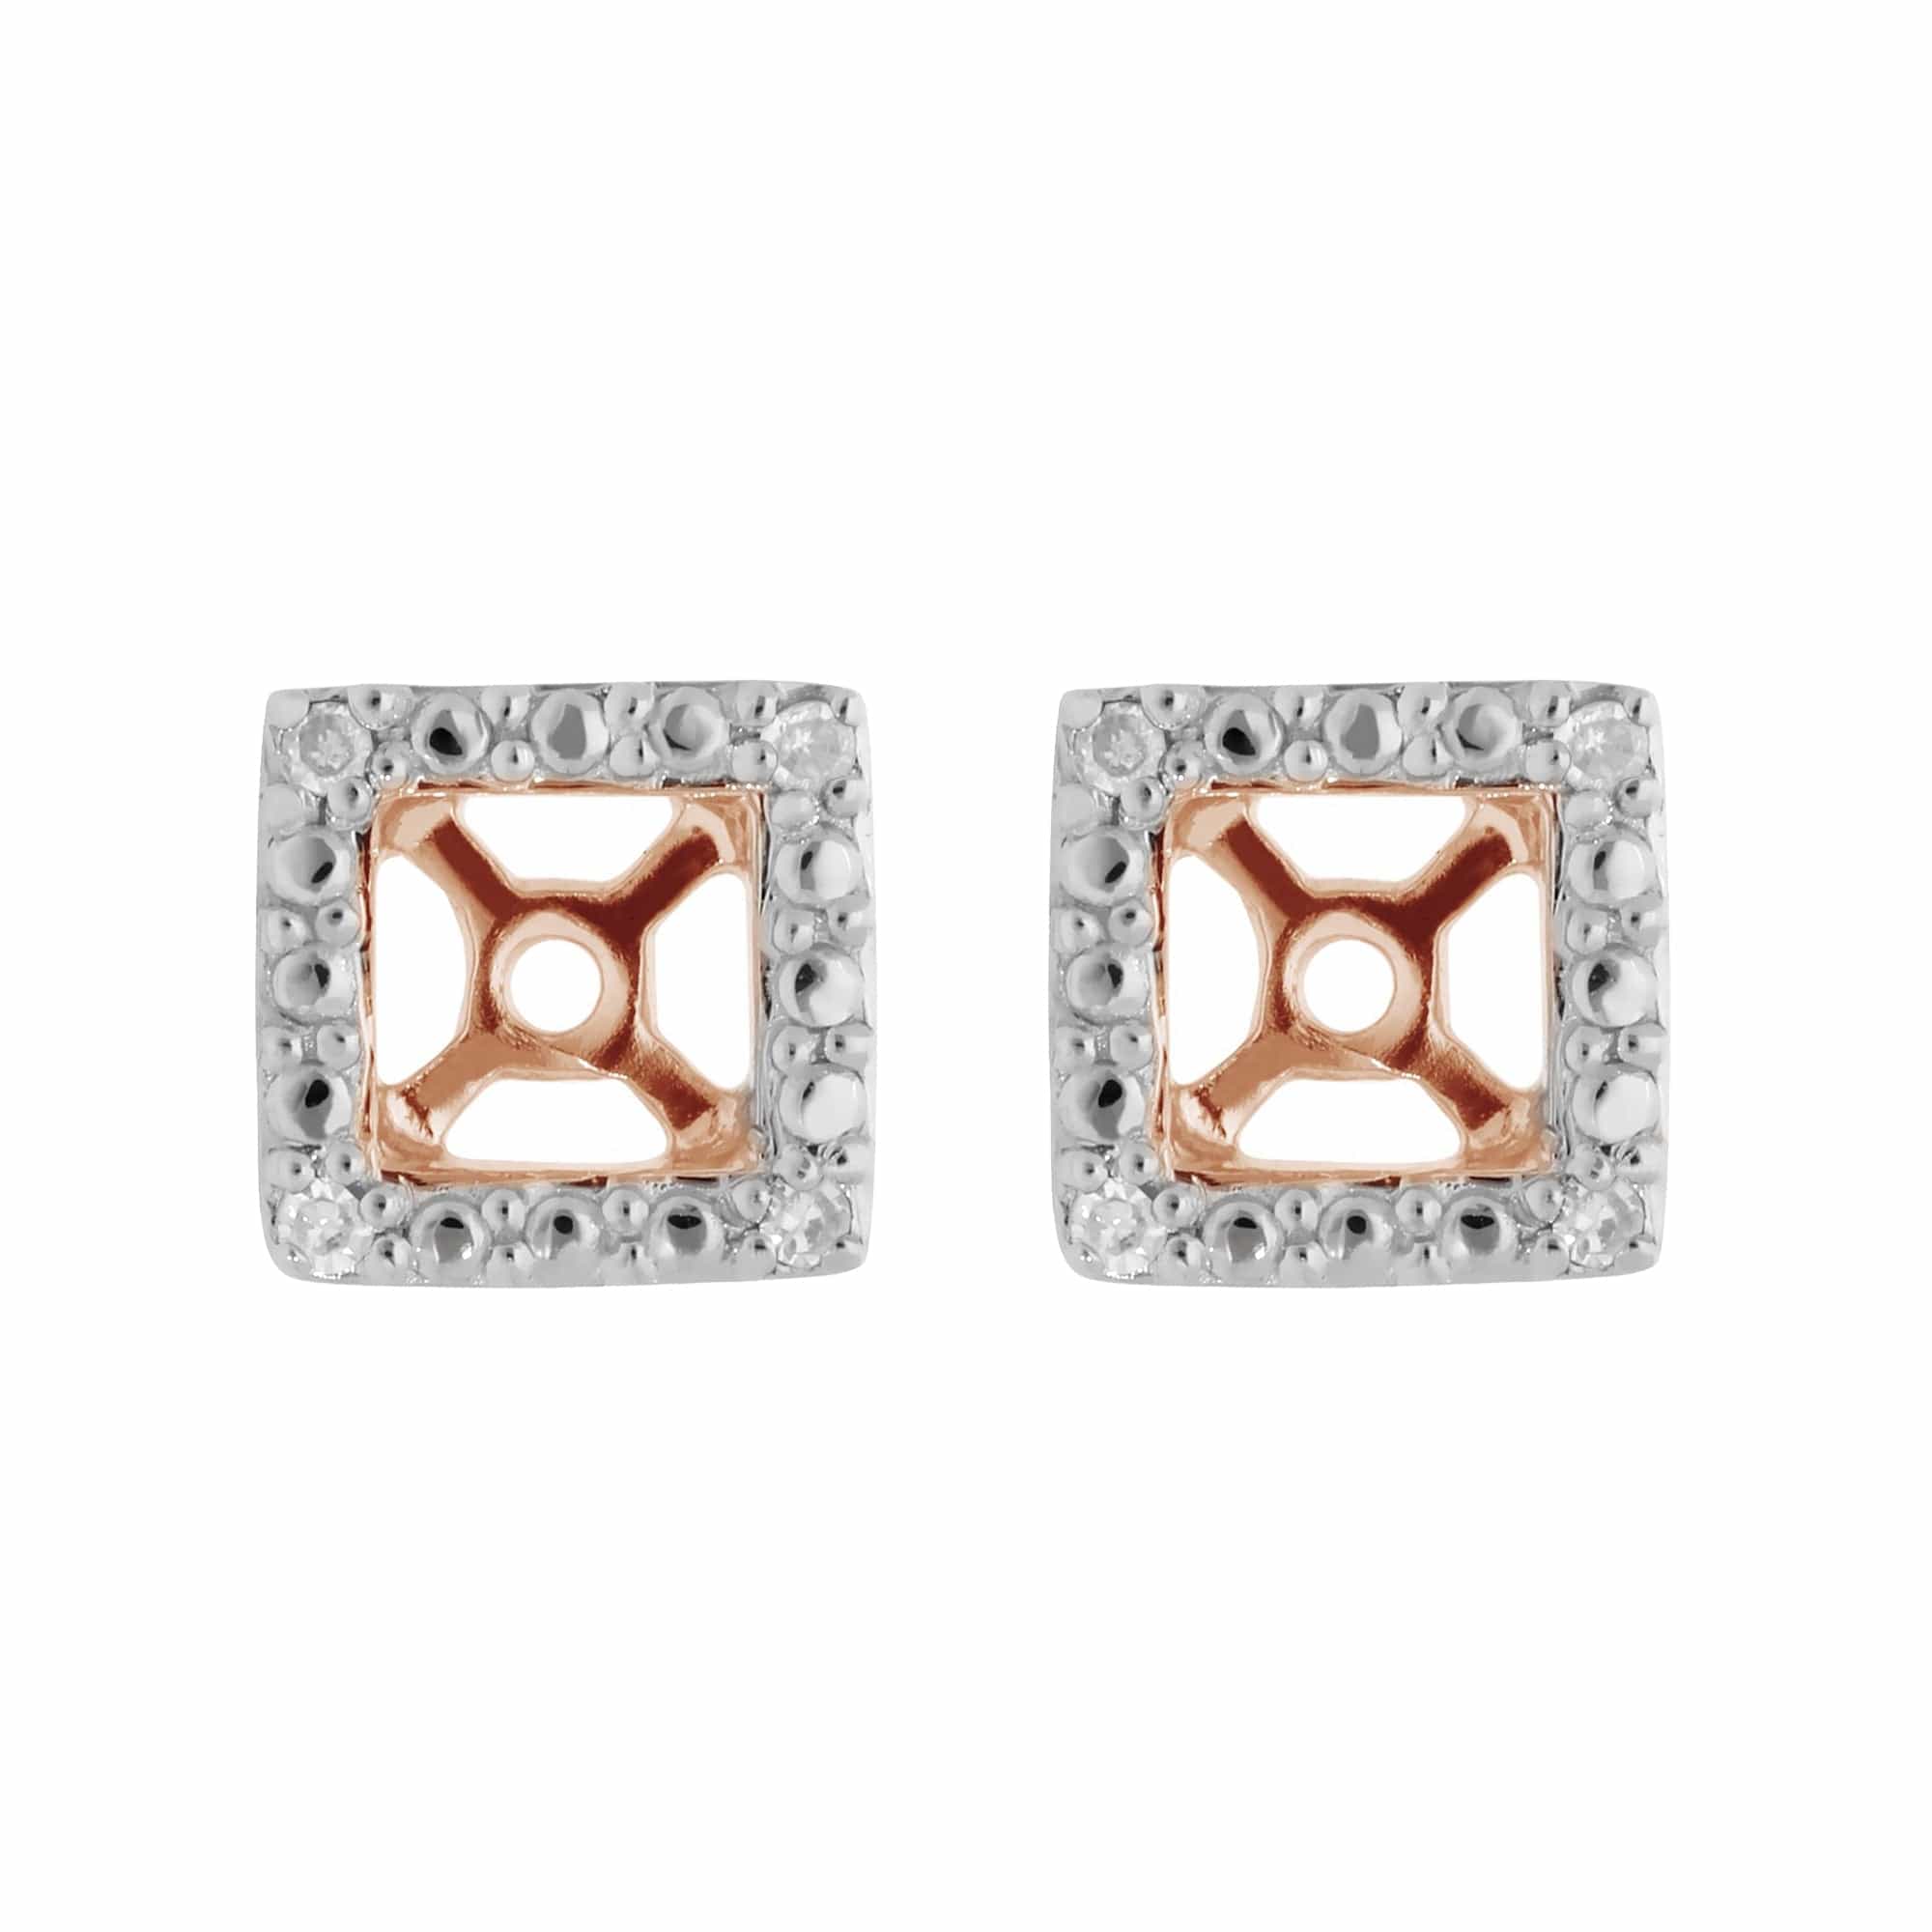 Classic Round Amethyst Stud Earrings with Detachable Diamond Square Ear Jacket in 9ct Rose Gold - Gemondo